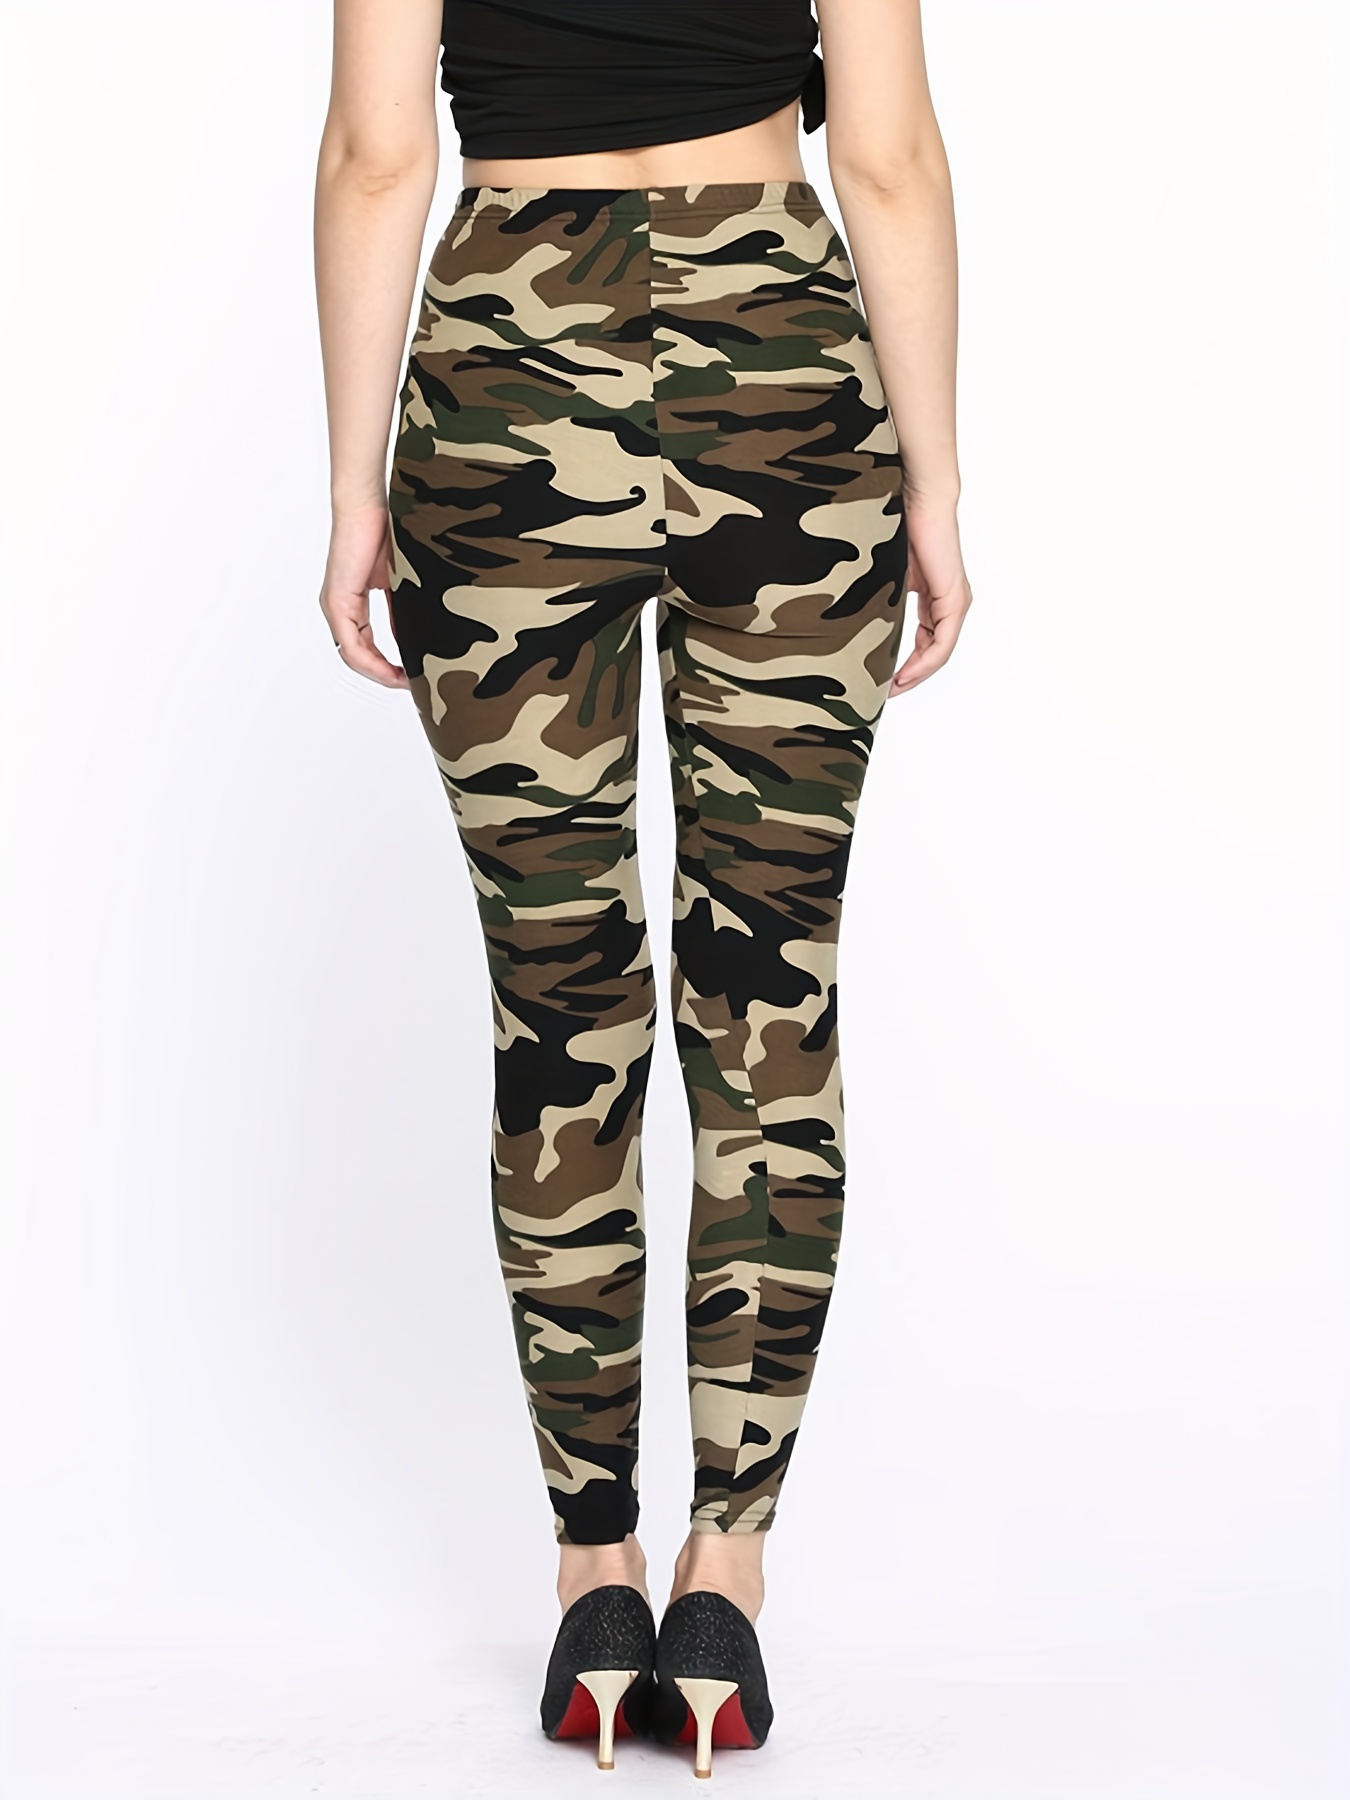 CUHAKCI WOMENS CAMOUFLAGE PRINT HIGH WAISTED LEGGINGS SIZE 12 NEW